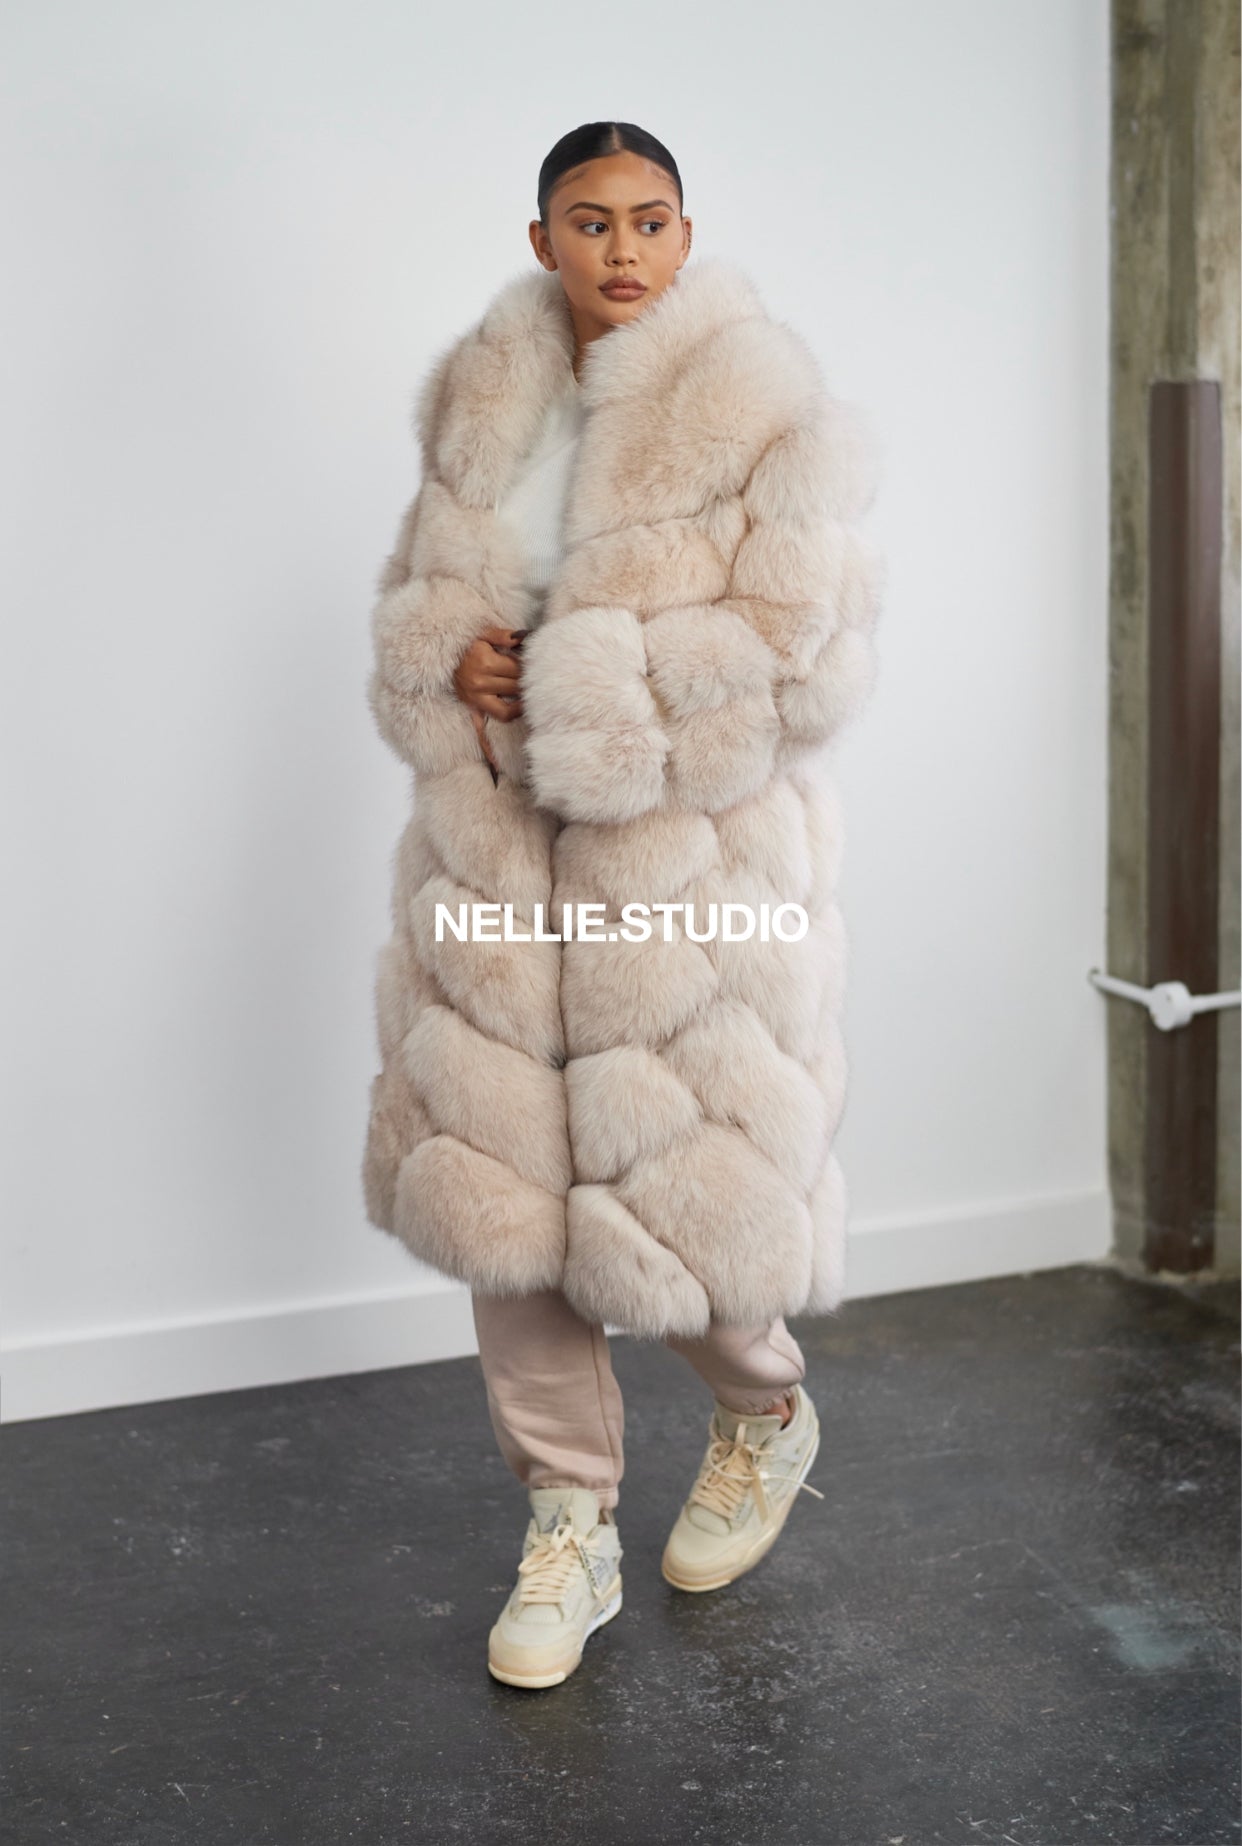 The 'XL' Full-Length Coat in Nude and Natural White